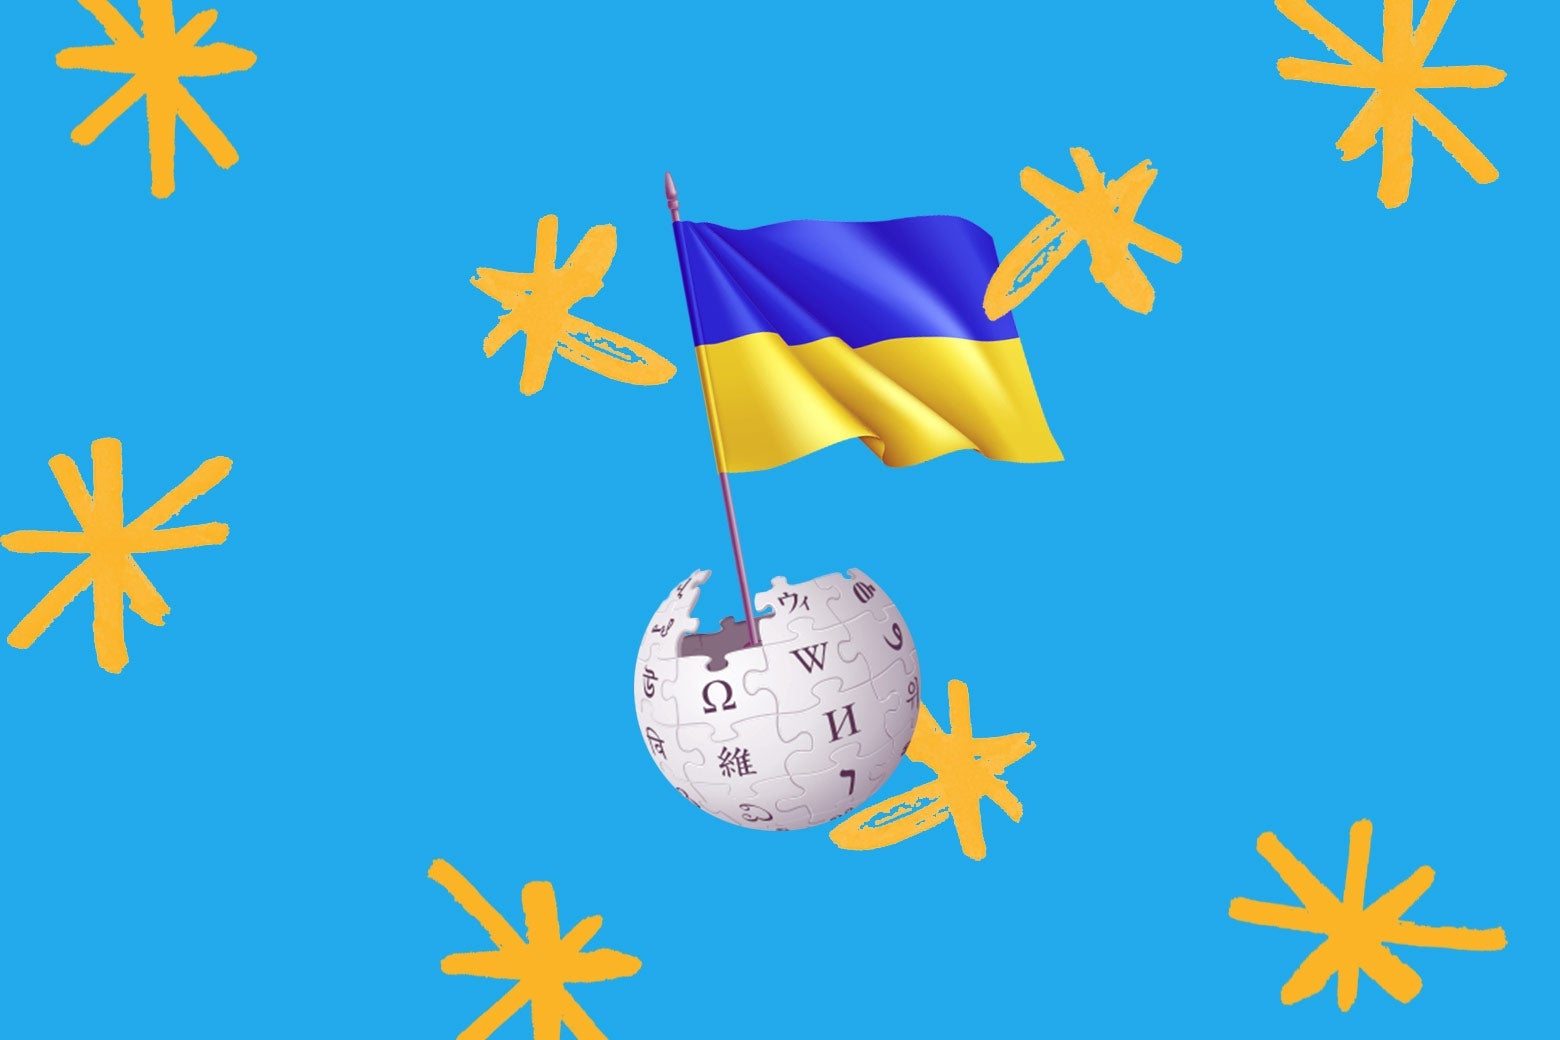 The Wikipedia globe logo with a Ukrainian flag sticking out of it and surrounded by yellow asterisks